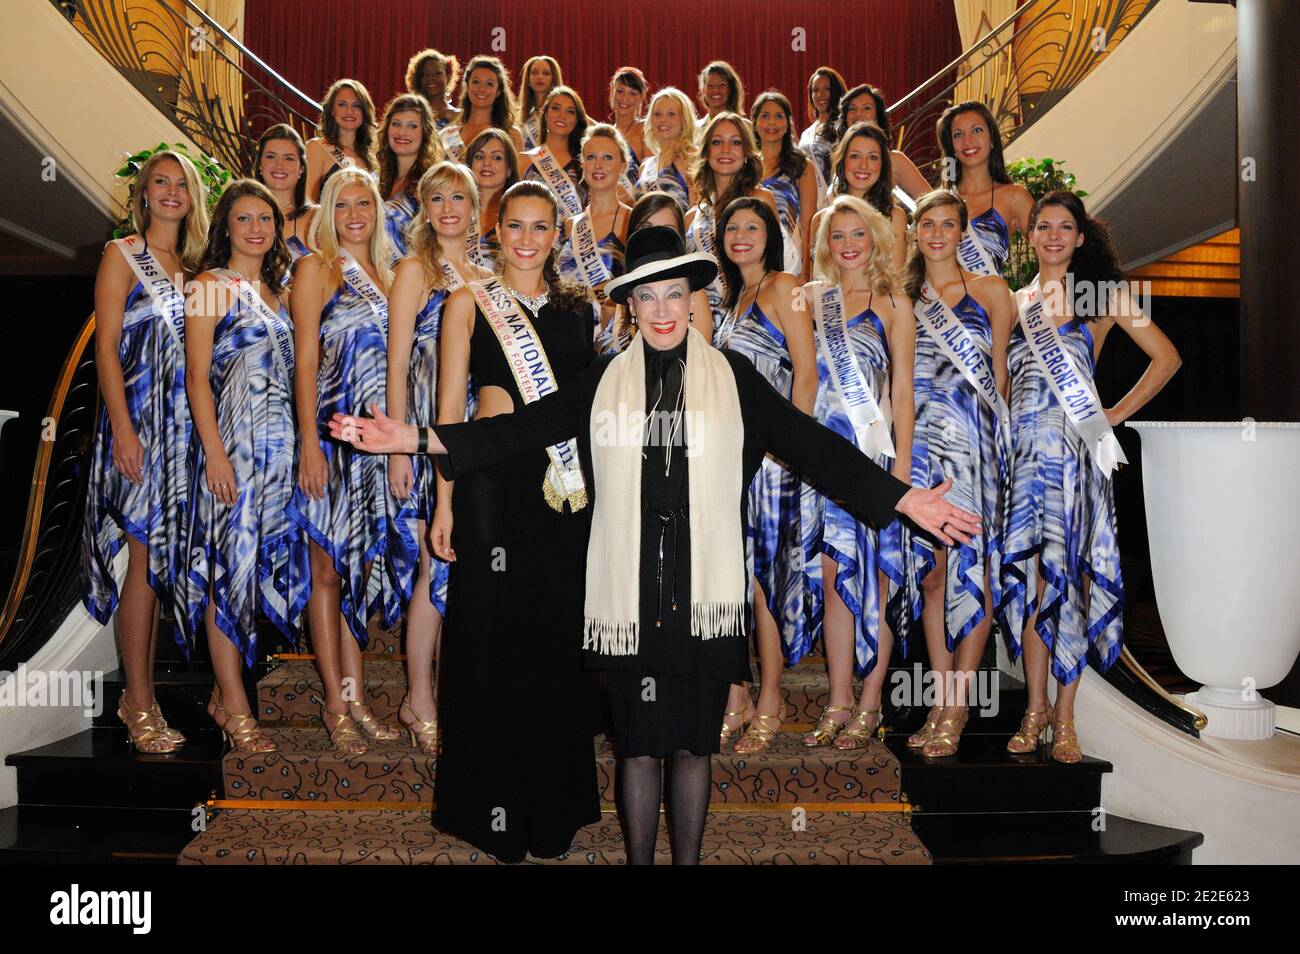 Genevieve de Fontenay and 'Miss Prestige National 2011' Barbara Morel pose with the reginonal Misses at the presentation of the 'Miss Prestige National 2012' pageant at Hotel Arc de Triomphe Hilton' in Paris, France, on November 26, 2011. Photo by Alban Wyters/ABACAPRESS.COM Stock Photo